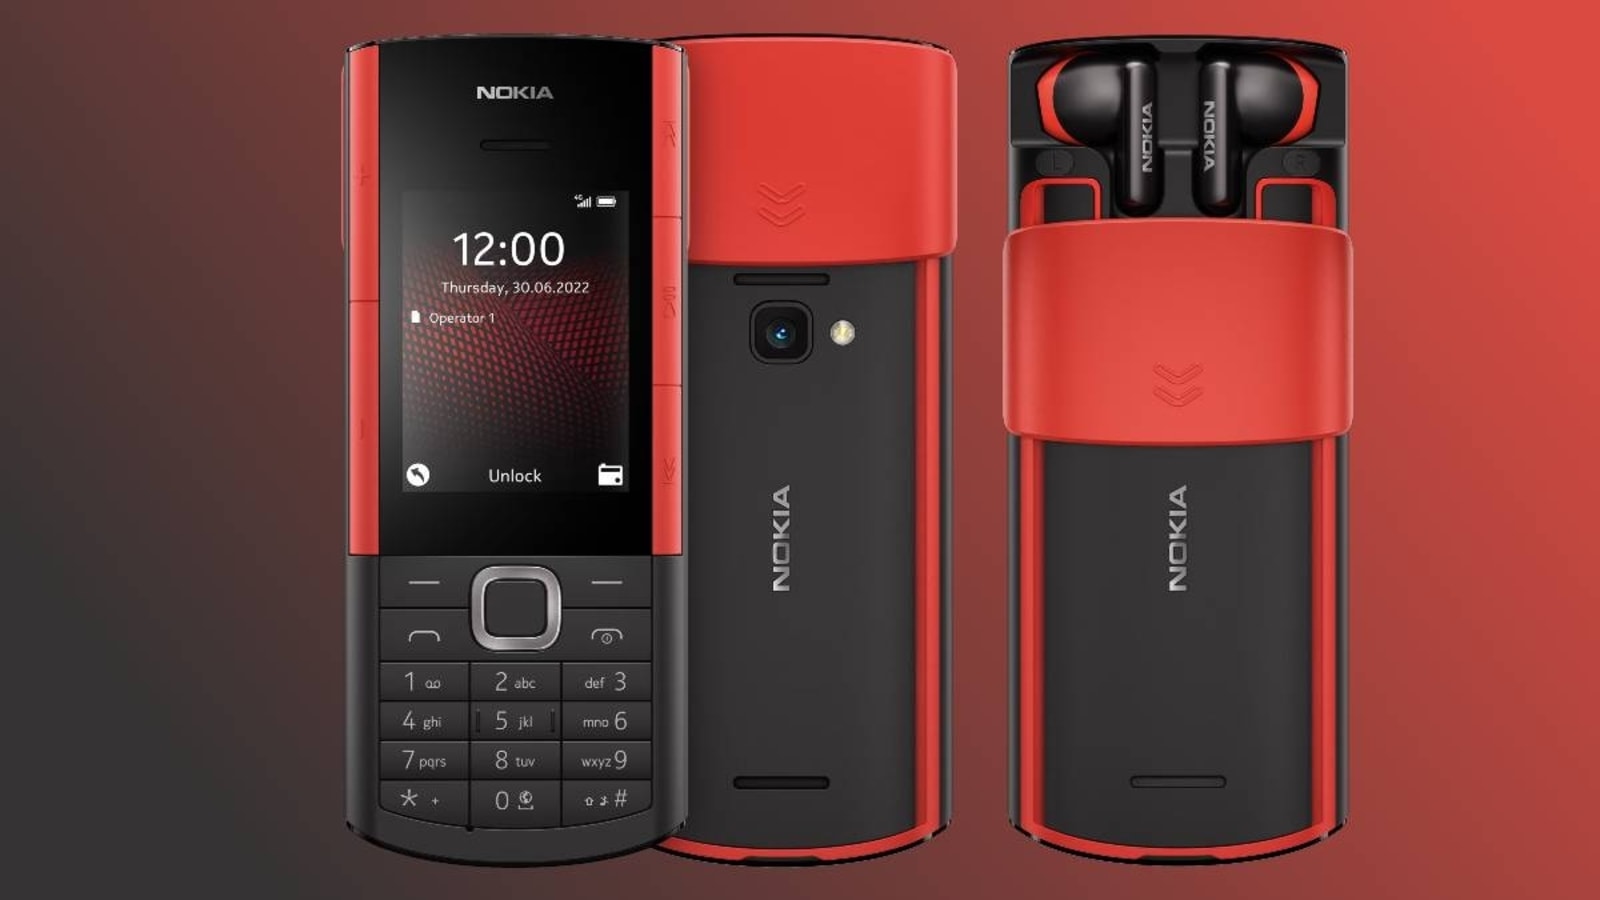 Nokia 5710 XpressAudio with TWS earbuds INSIDE launches in India! See what it costs | Mobile News